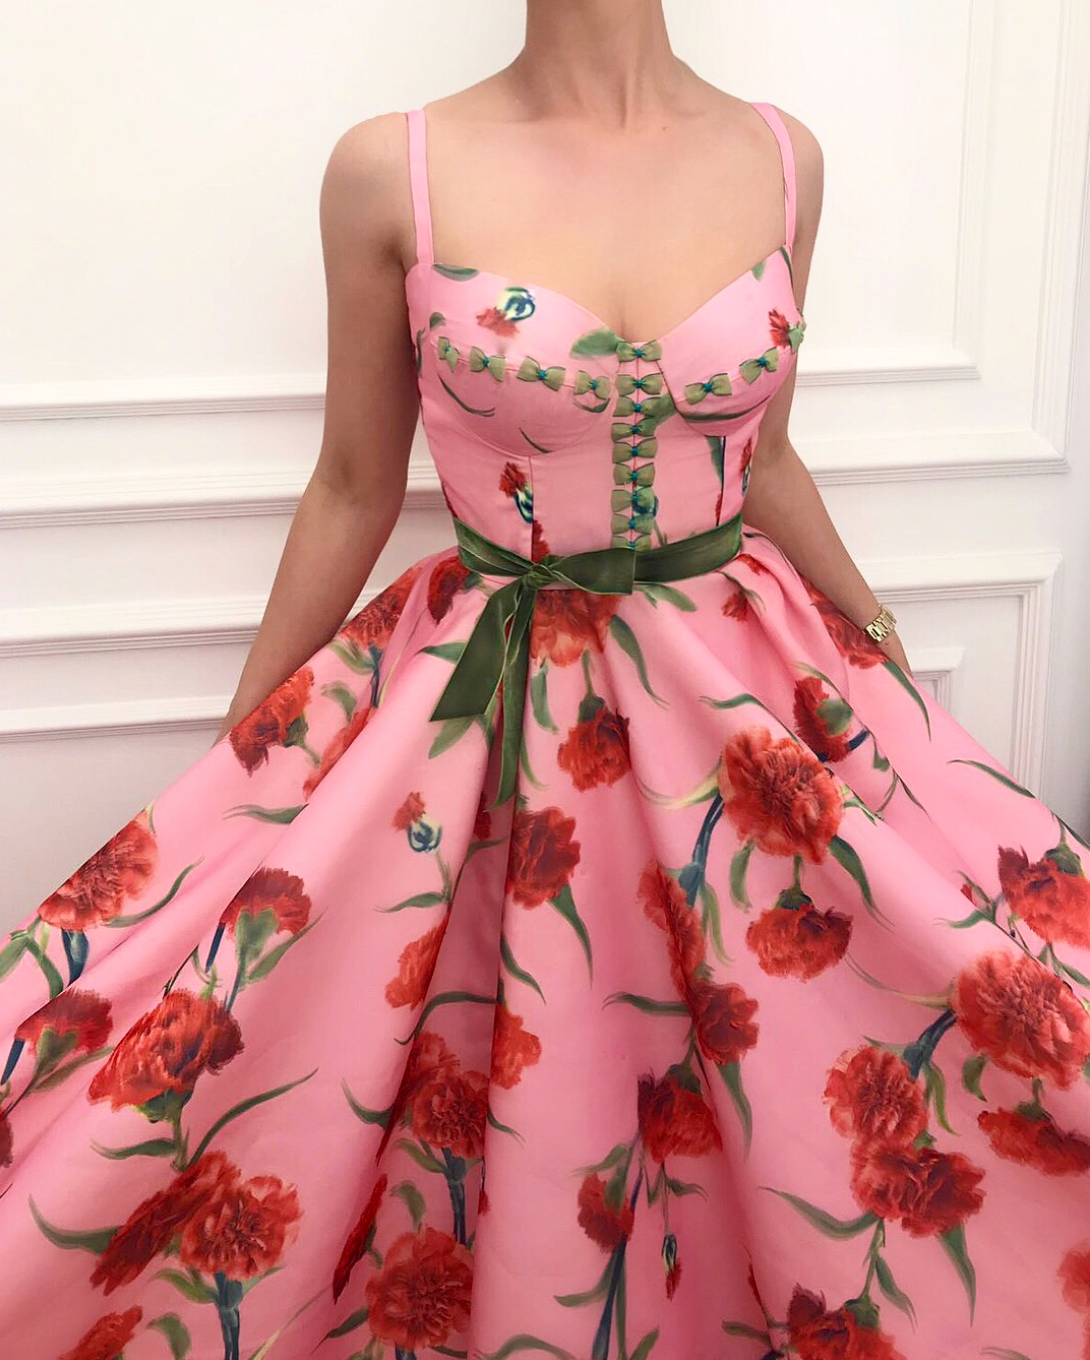 Pink A-Line dress with spaghetti straps, printed flowers and embroidery